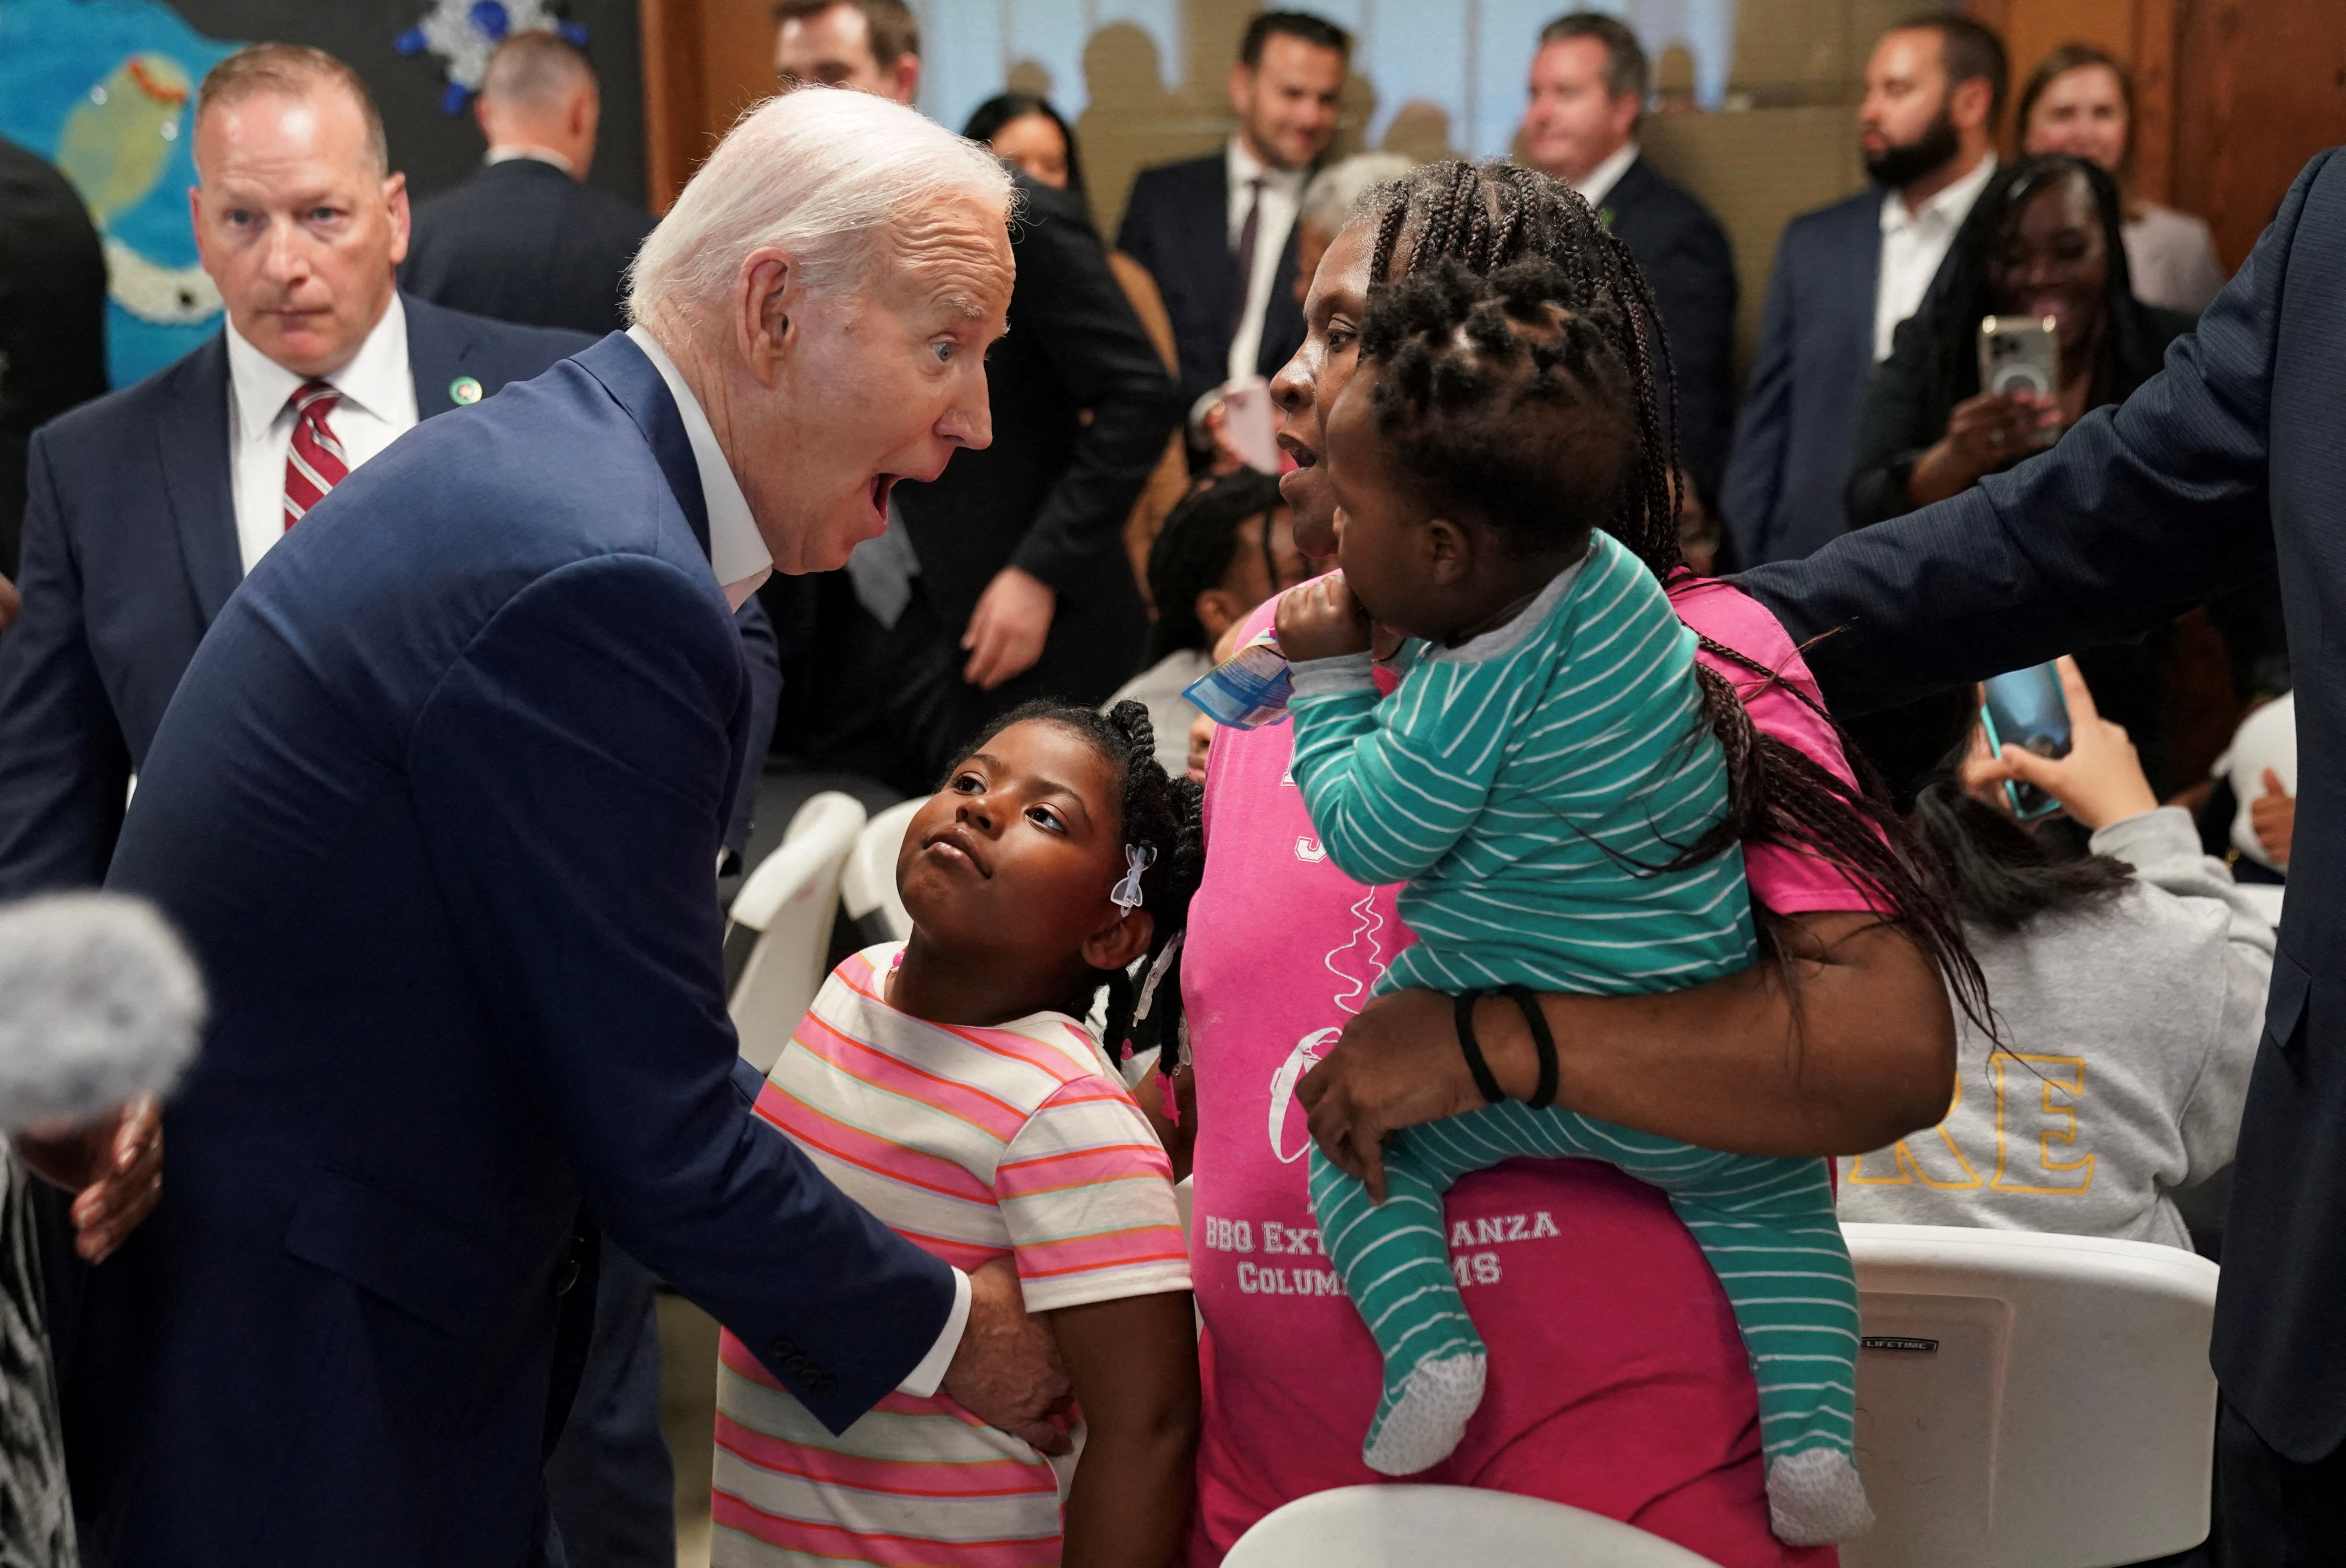 Biden holds a campaign event in Wisconsin